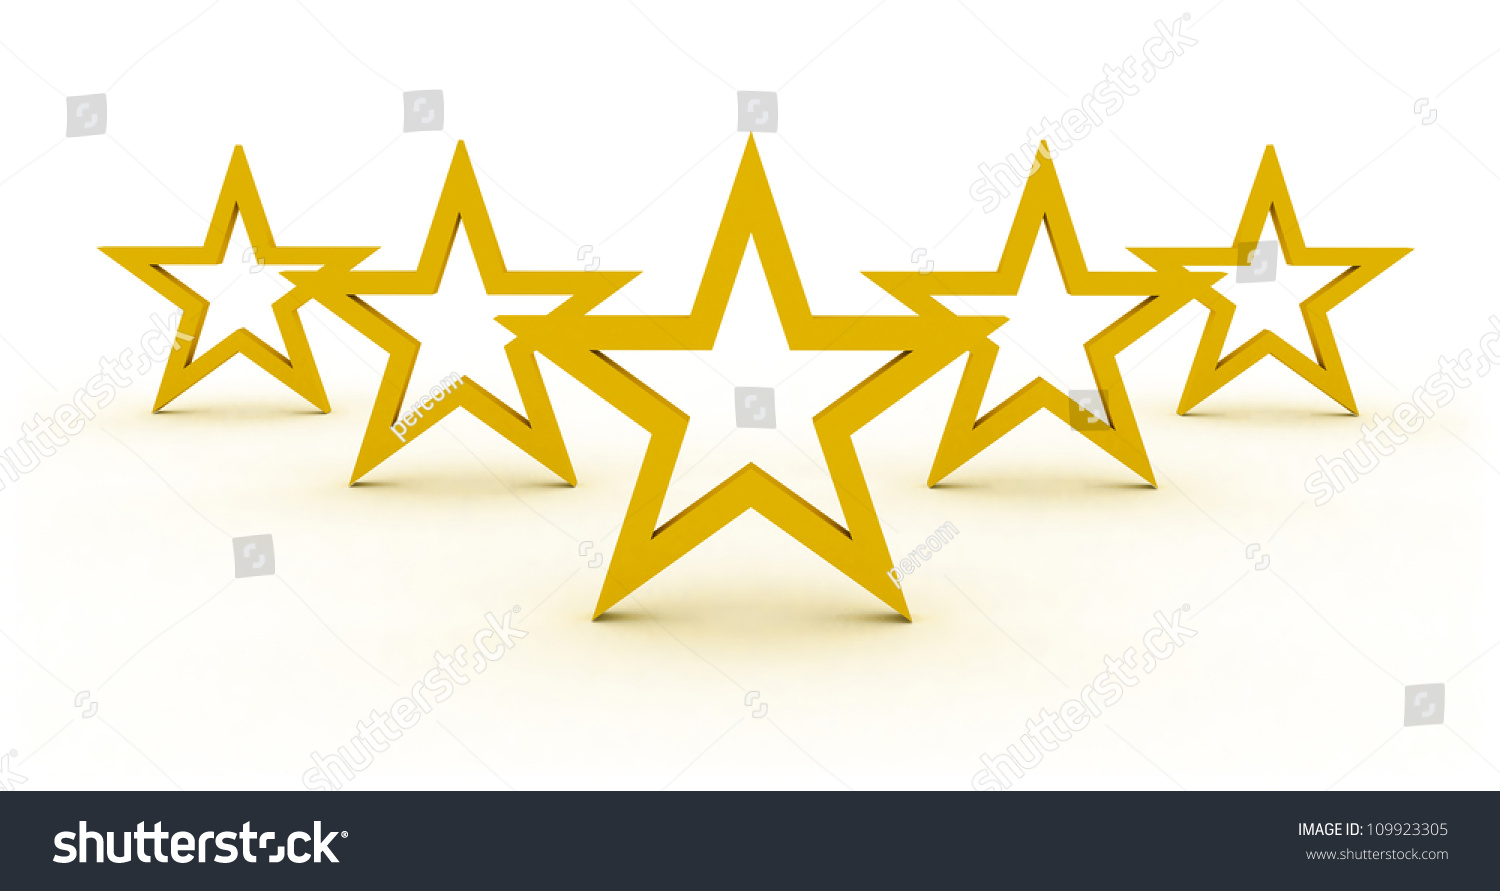 Star Rating With Five Stars Representing Symbol And Concept Of ...